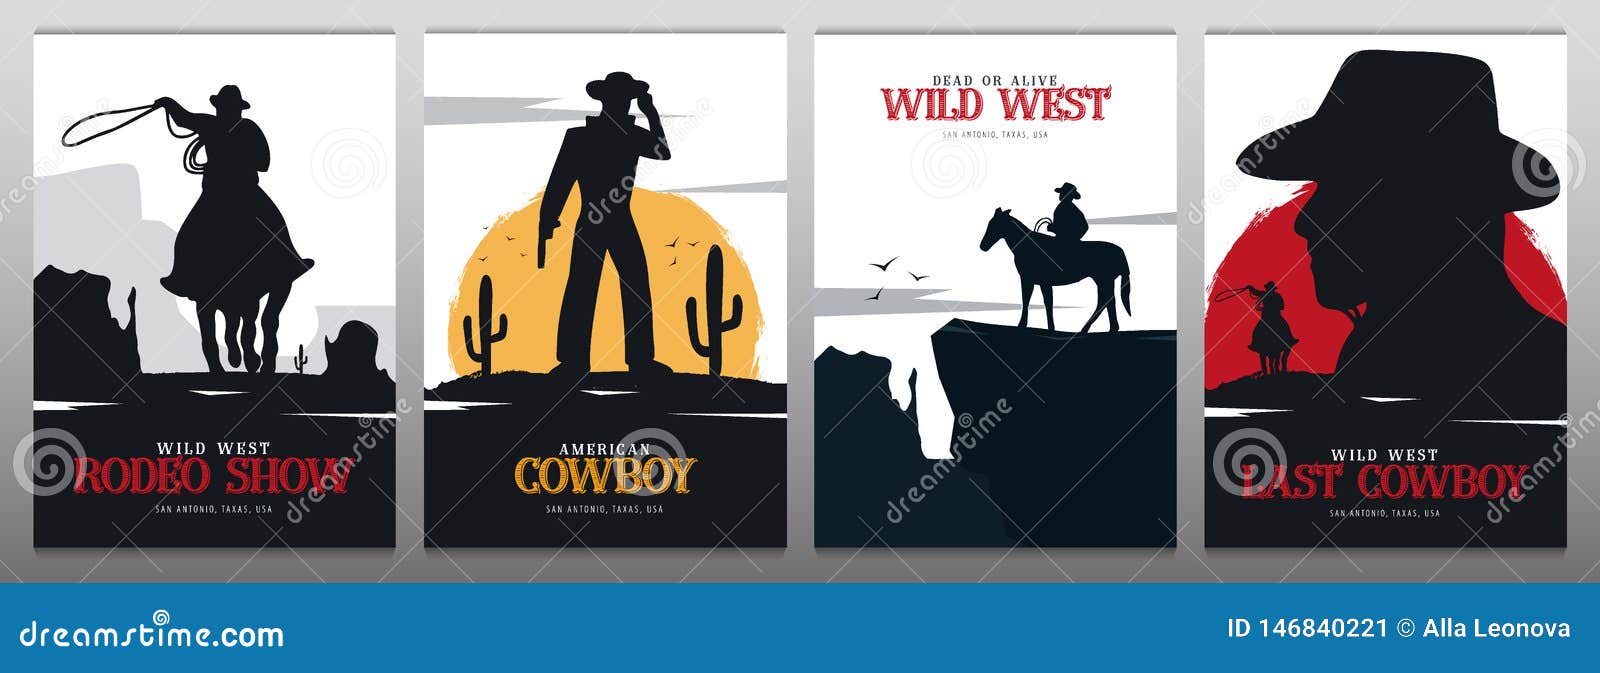 Set of Cowboy Banners. Rodeo. Wild West Banner. Texas. Vector ...